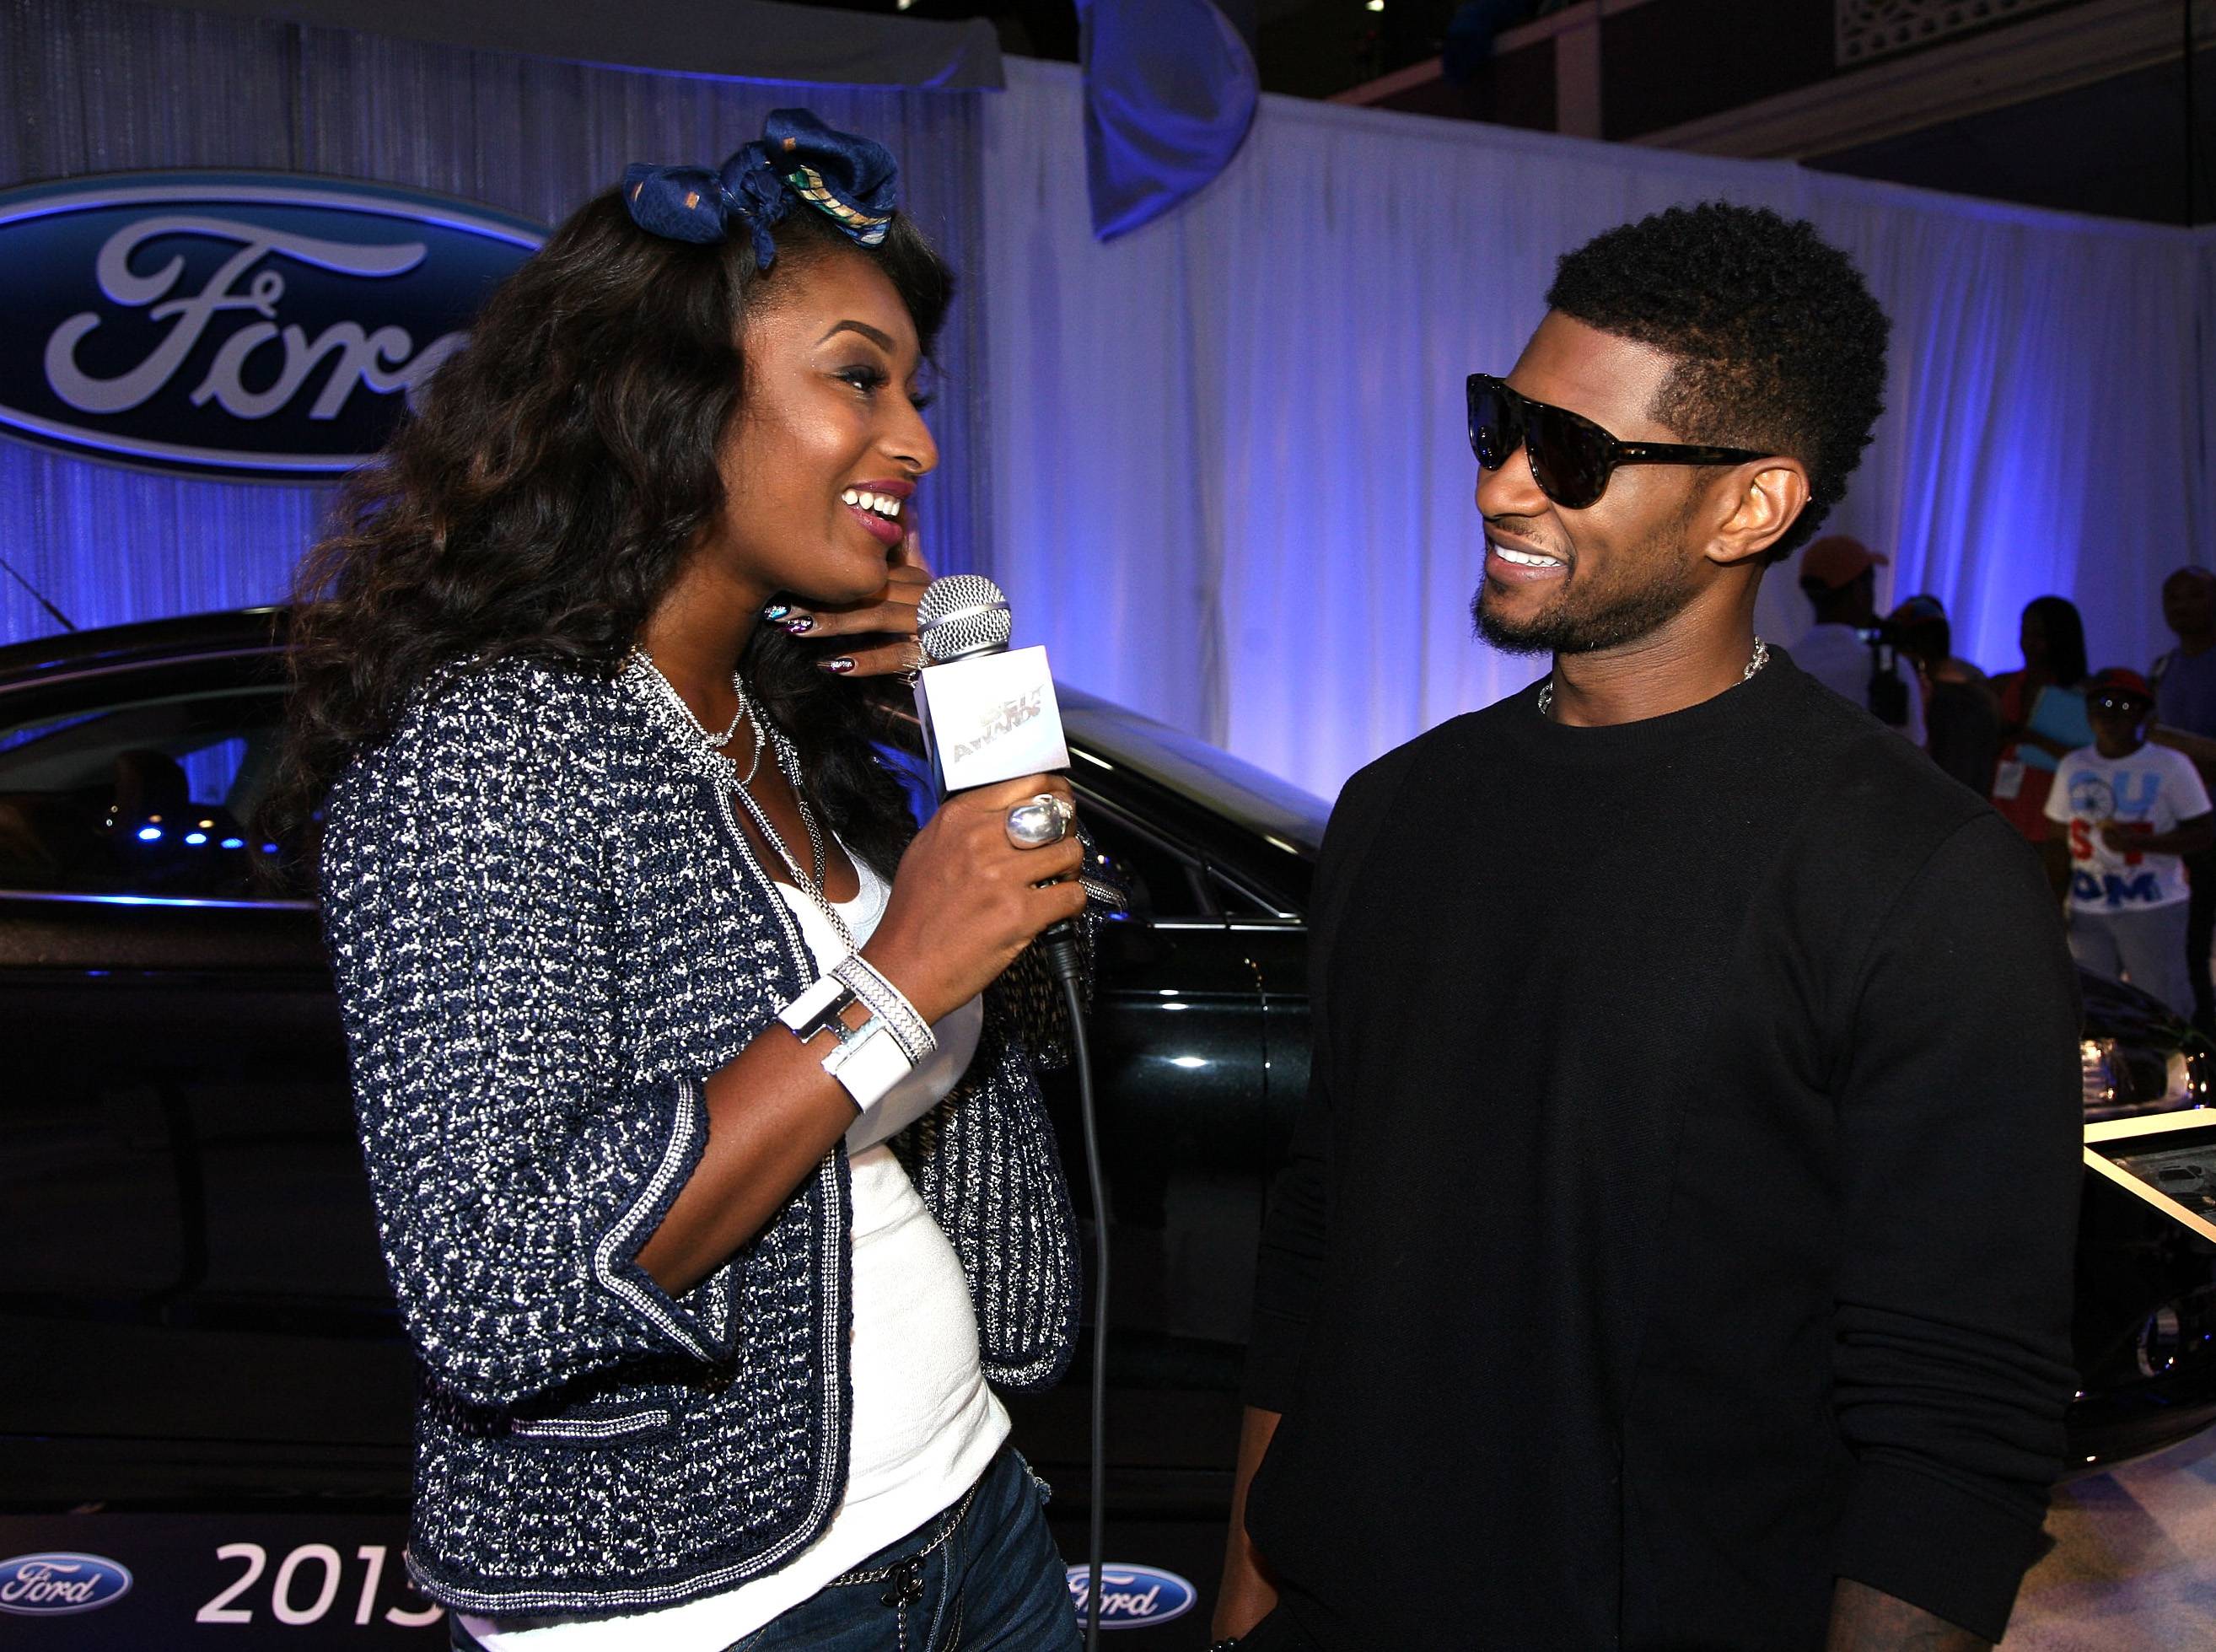 LOS ANGELES, CA - JUNE 30: Singer Usher attends day 2 of the 2012 BET Awards Ford Hot Spot Room held at The Shrine Auditorium on June 30, 2012 in Los Angeles, California. (Photo: Maury Phillips/Getty Images For BET)